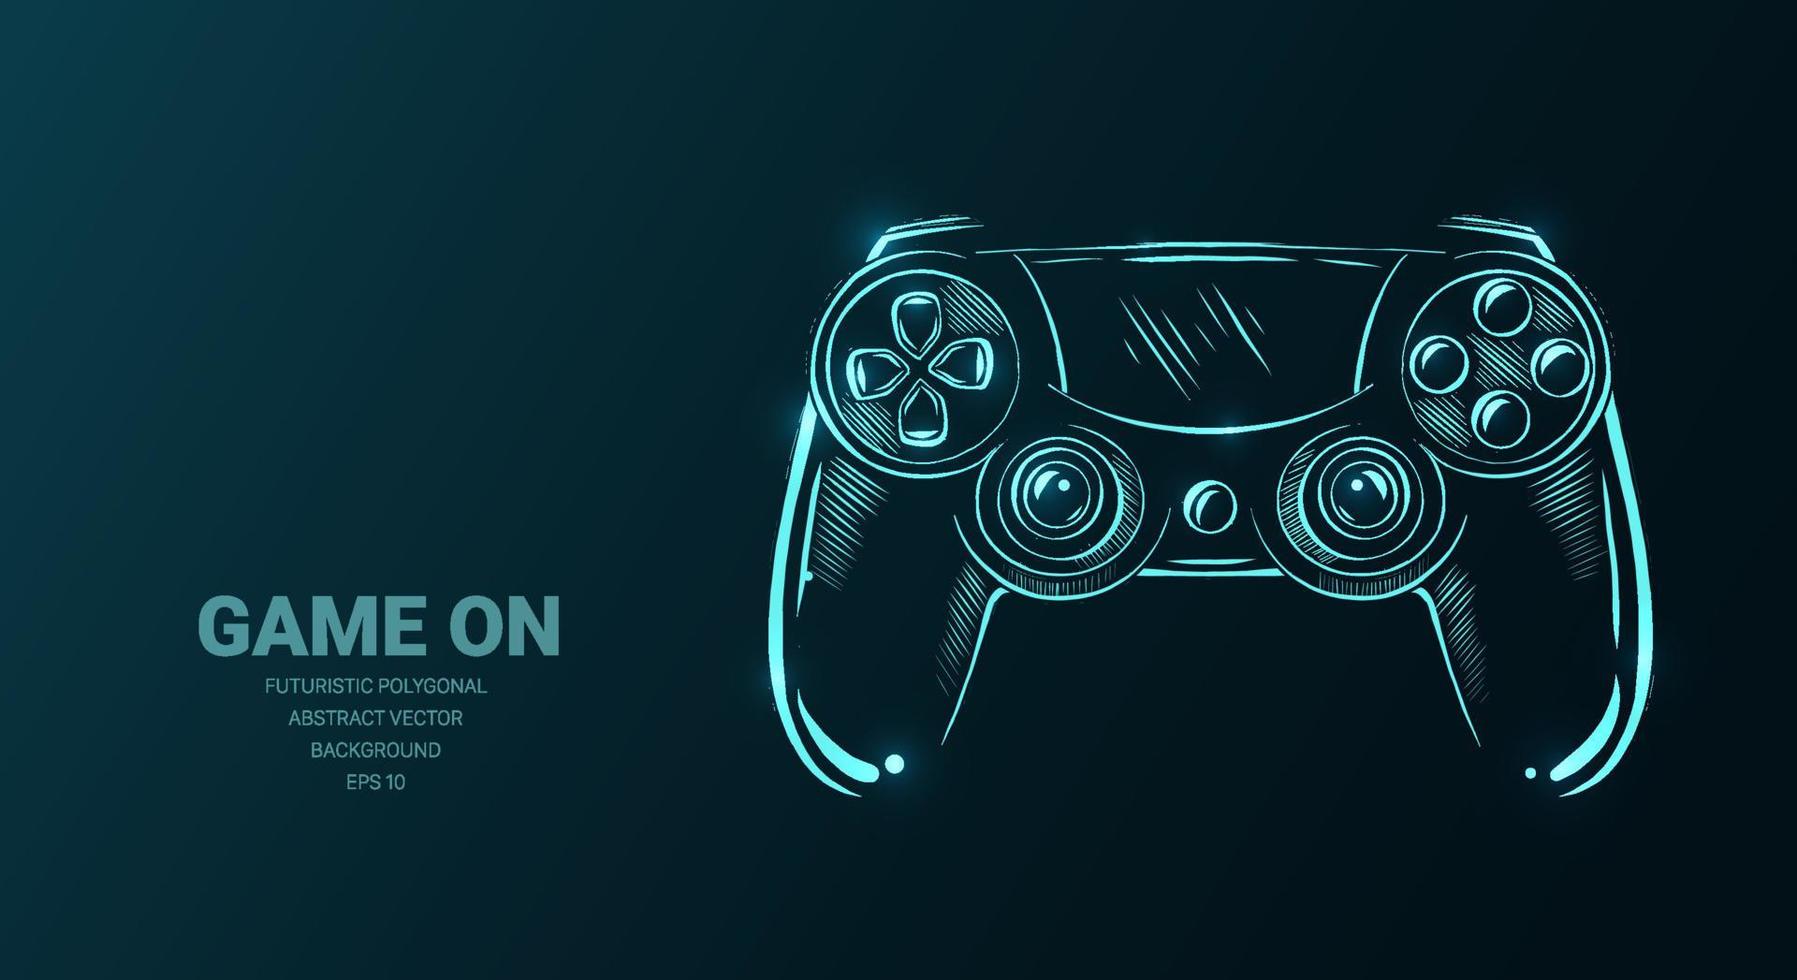 Futuristic illustration with joystick game controller or sketch, concept sign on dark background for video games. vector